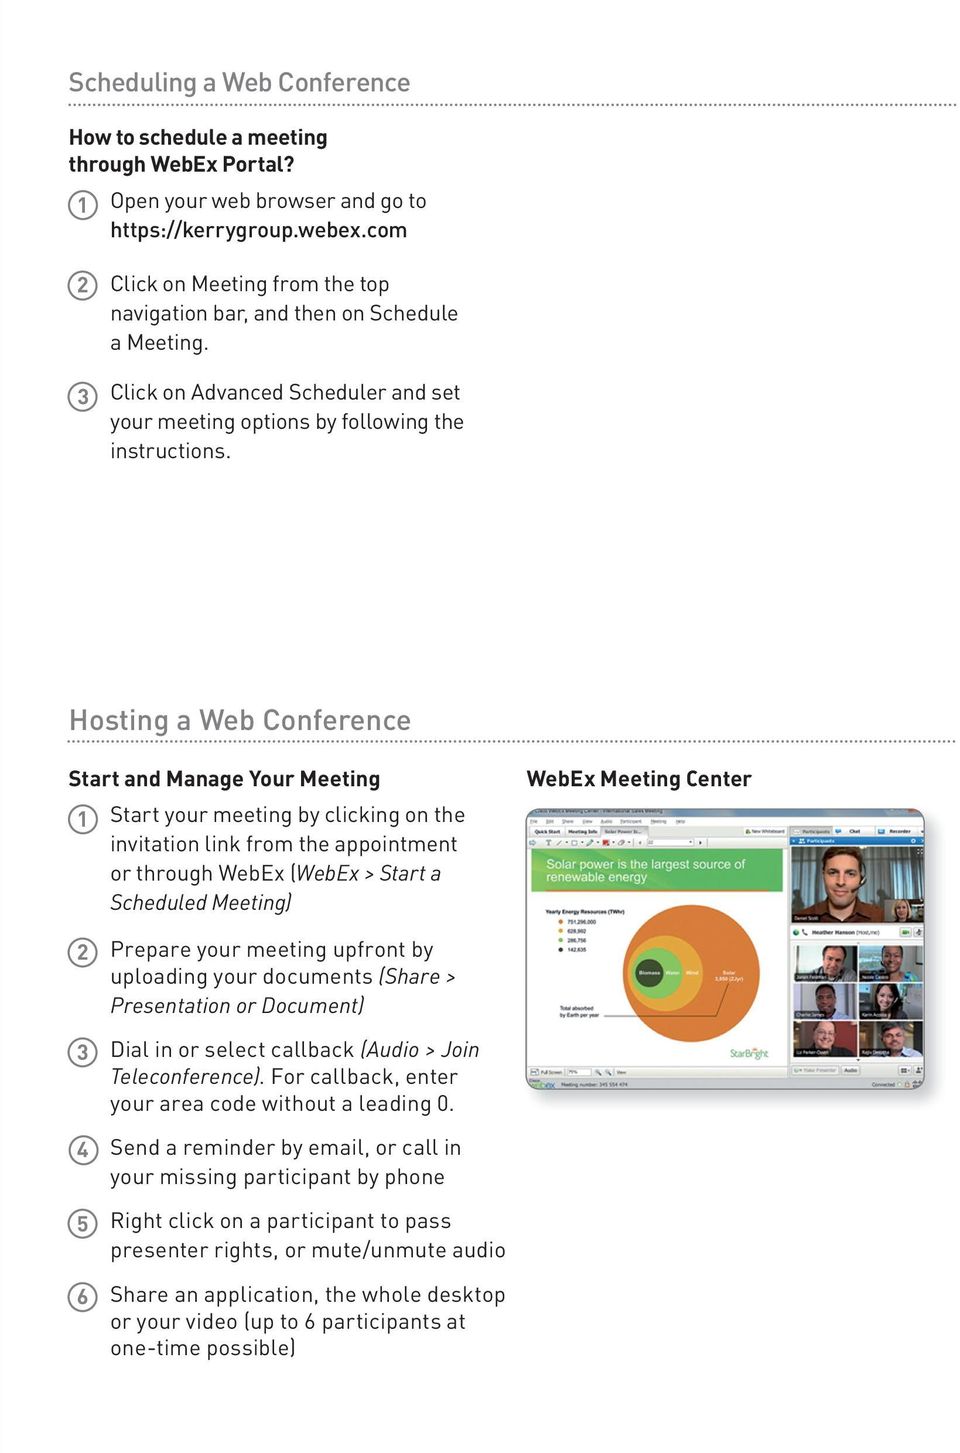 Hosting a Web Conference Start and Manage Your Meeting 1 Start your meeting by clicking on the invitation link from the appointment or through WebEx (WebEx > Start a Scheduled Meeting) WebEx Meeting